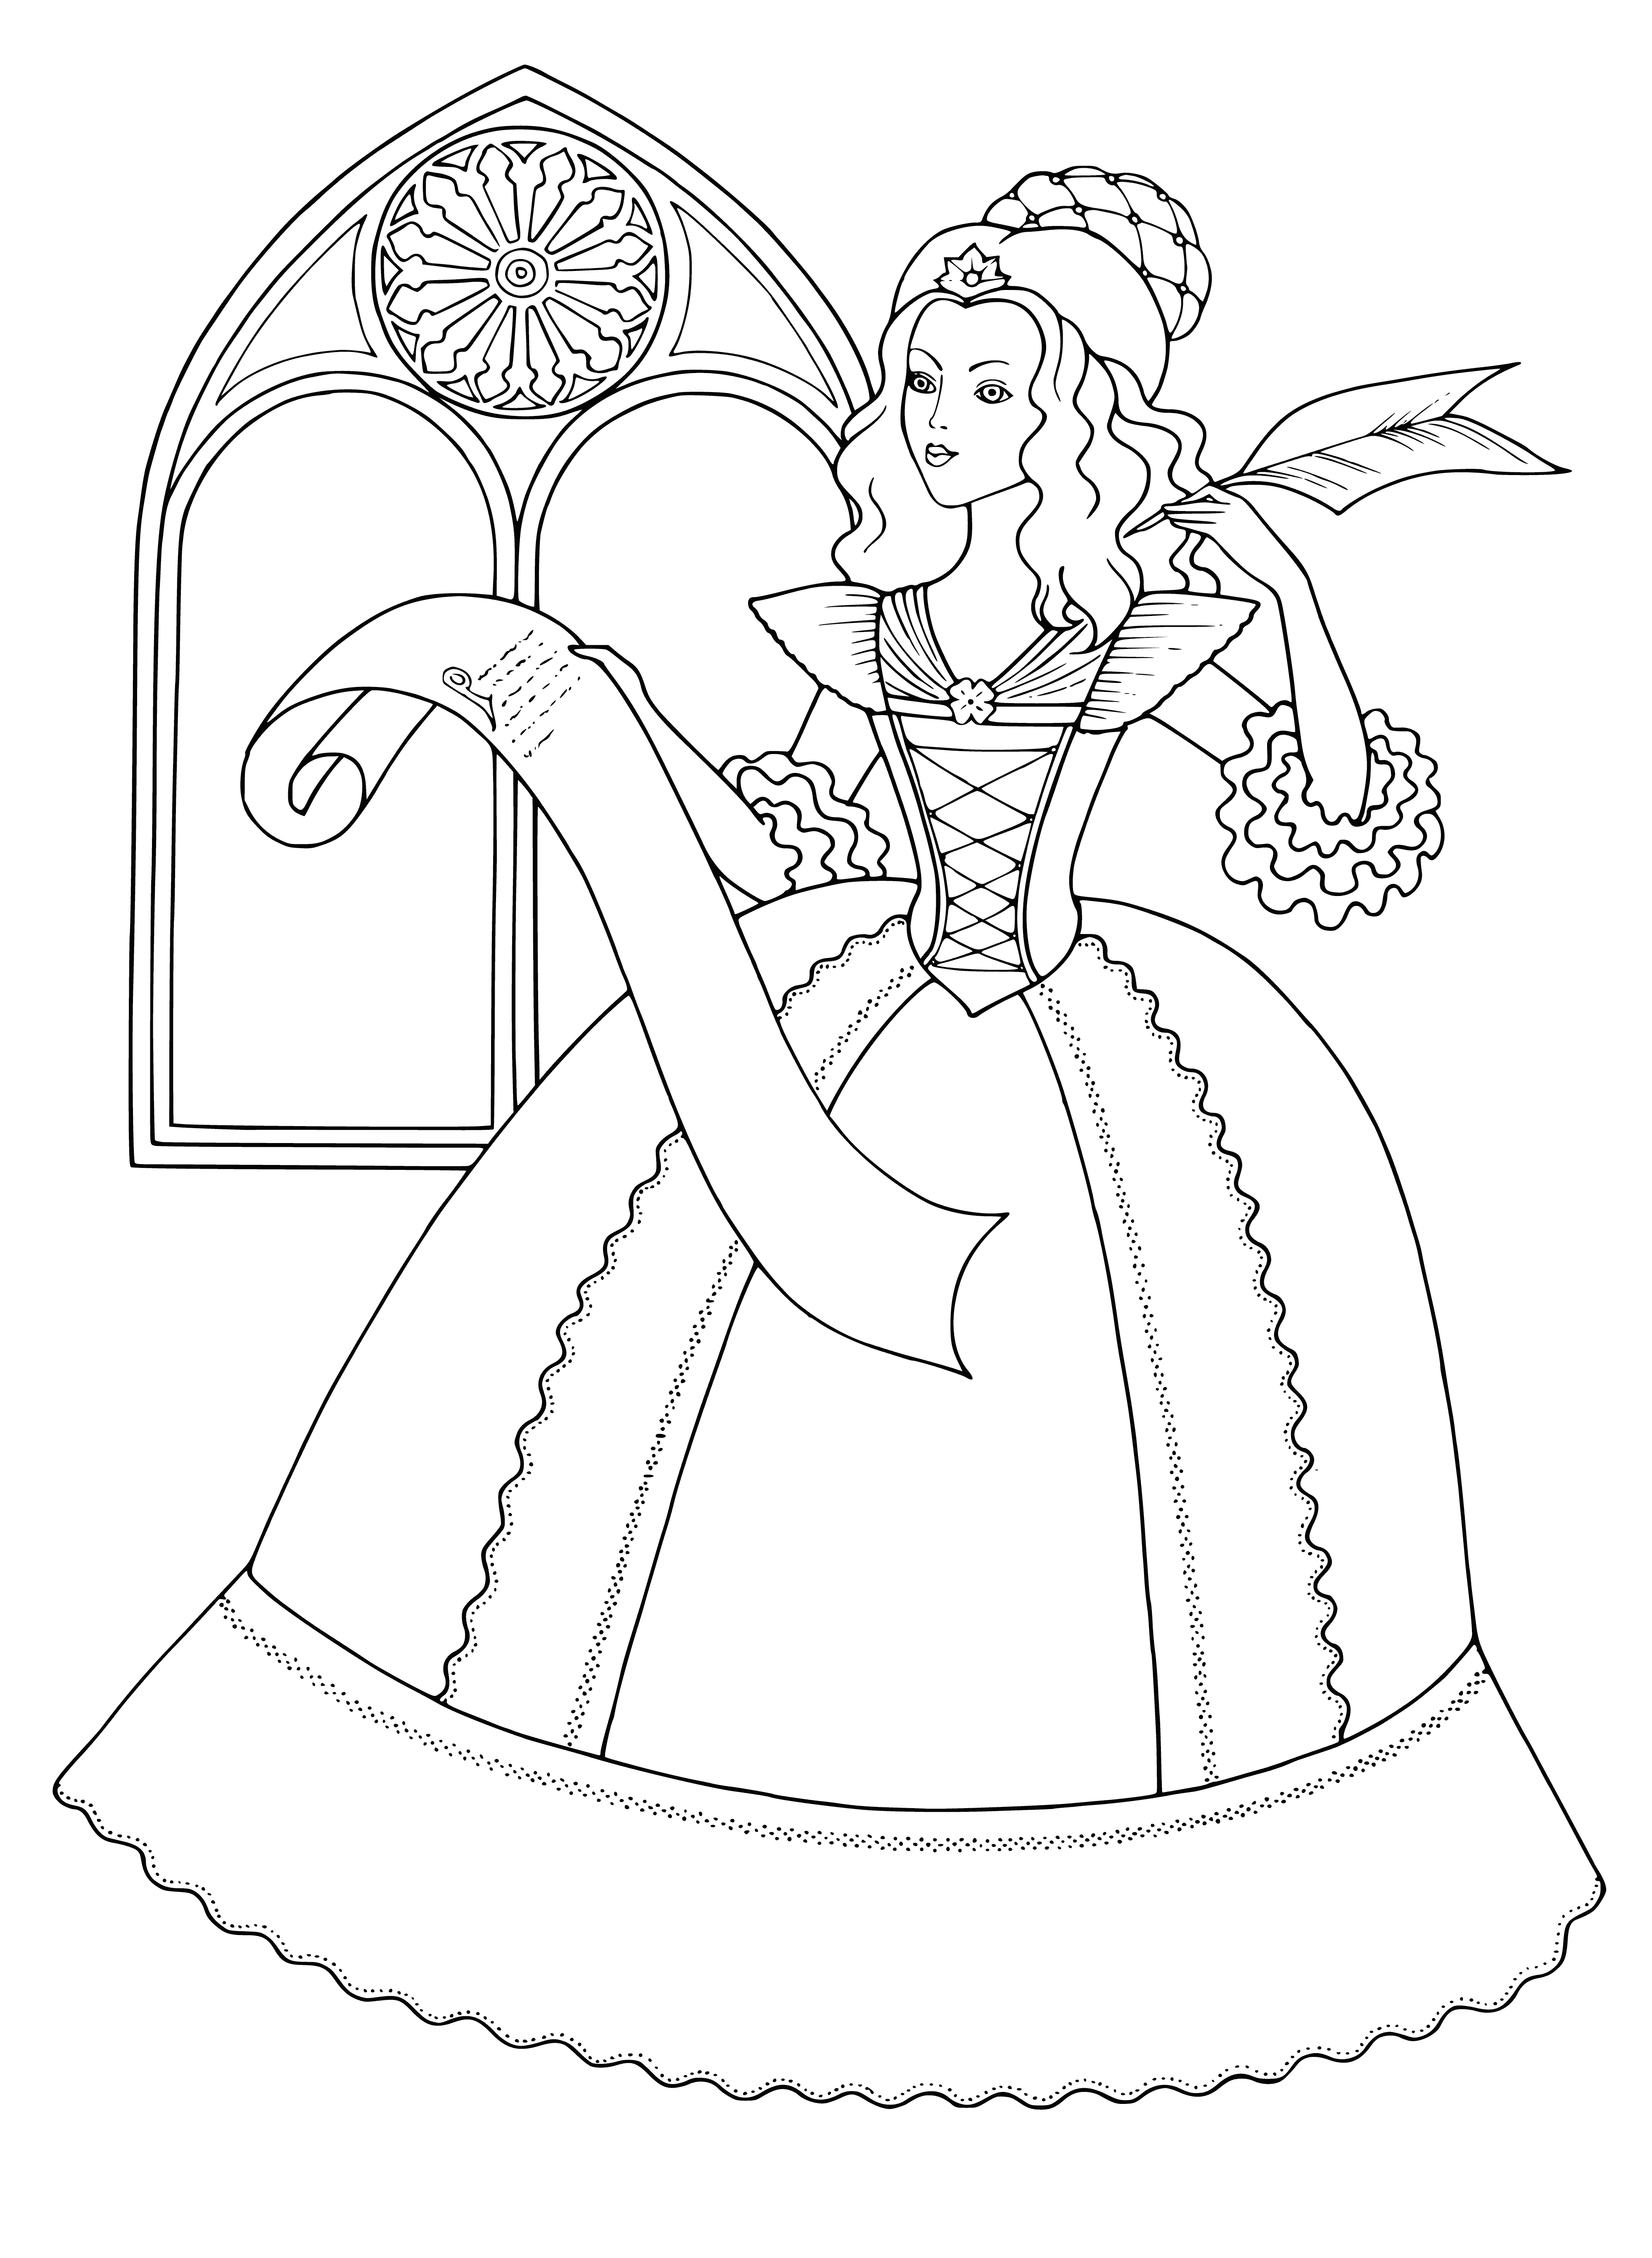 coloring page: Beauty, grace and captivating charm - my lovely princess graces the world with her presence.